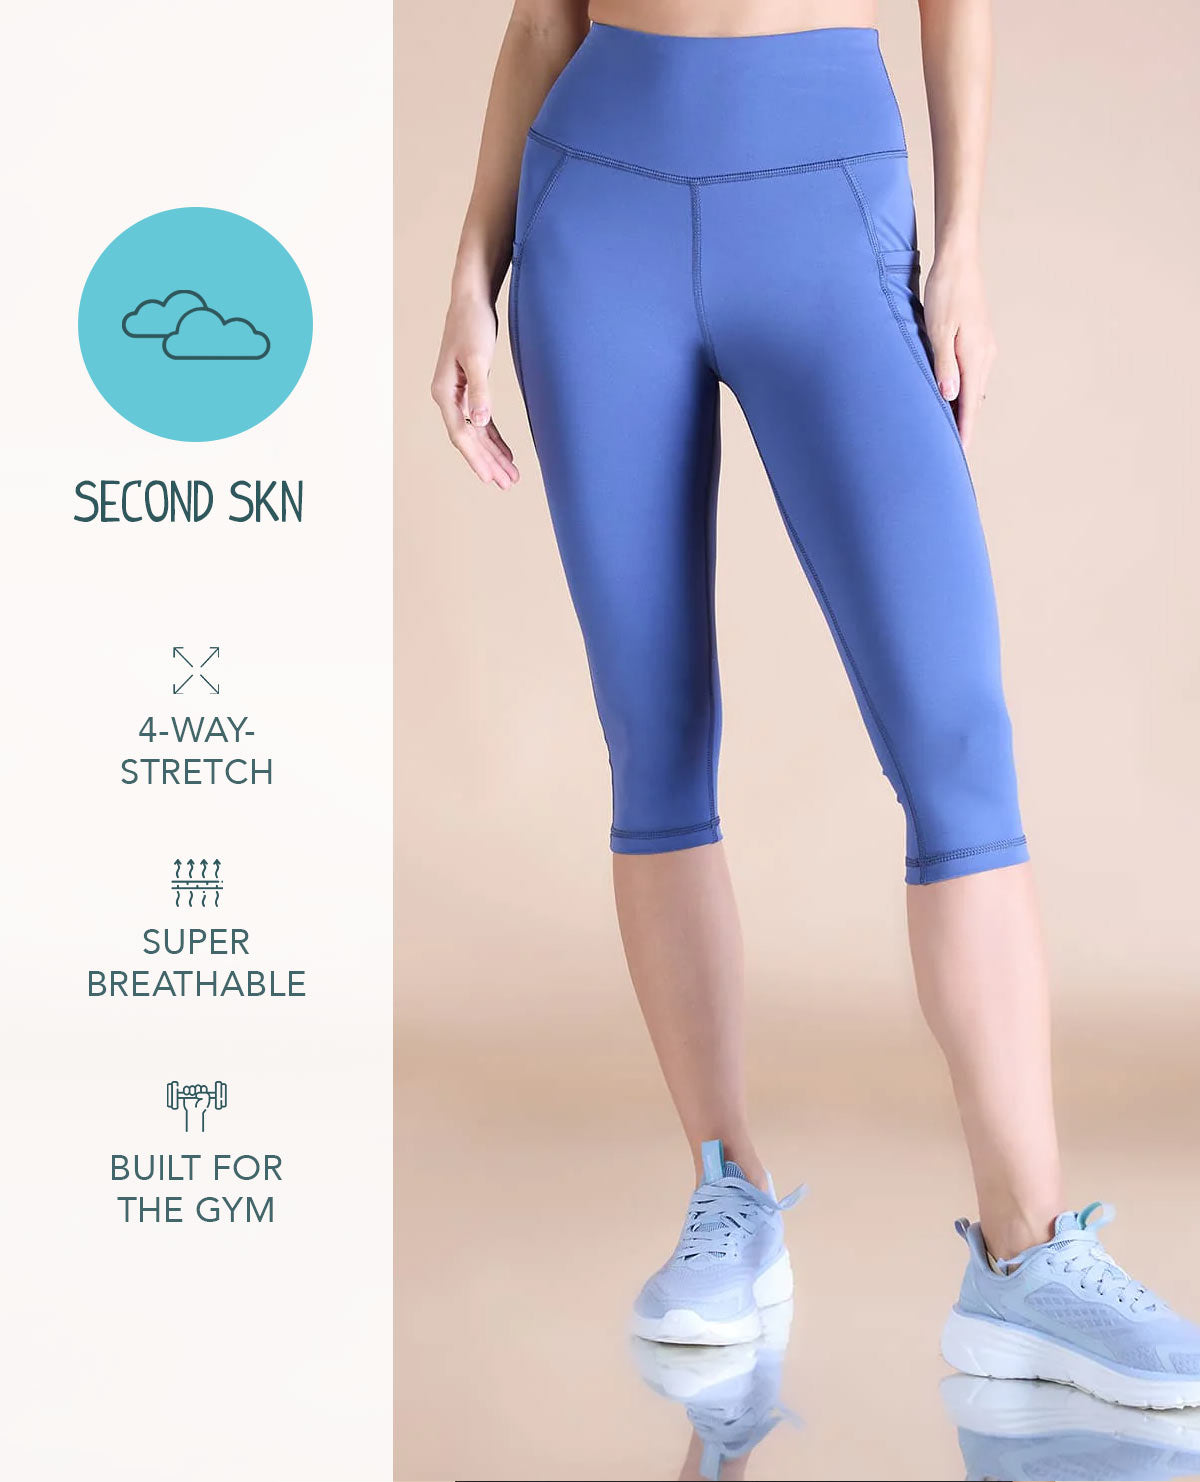 Soft & Thick Leggings for Yogi Second Skin Stretchy Organic Cotton Comfort  in Style Boho Active Wear OFFRANDES 